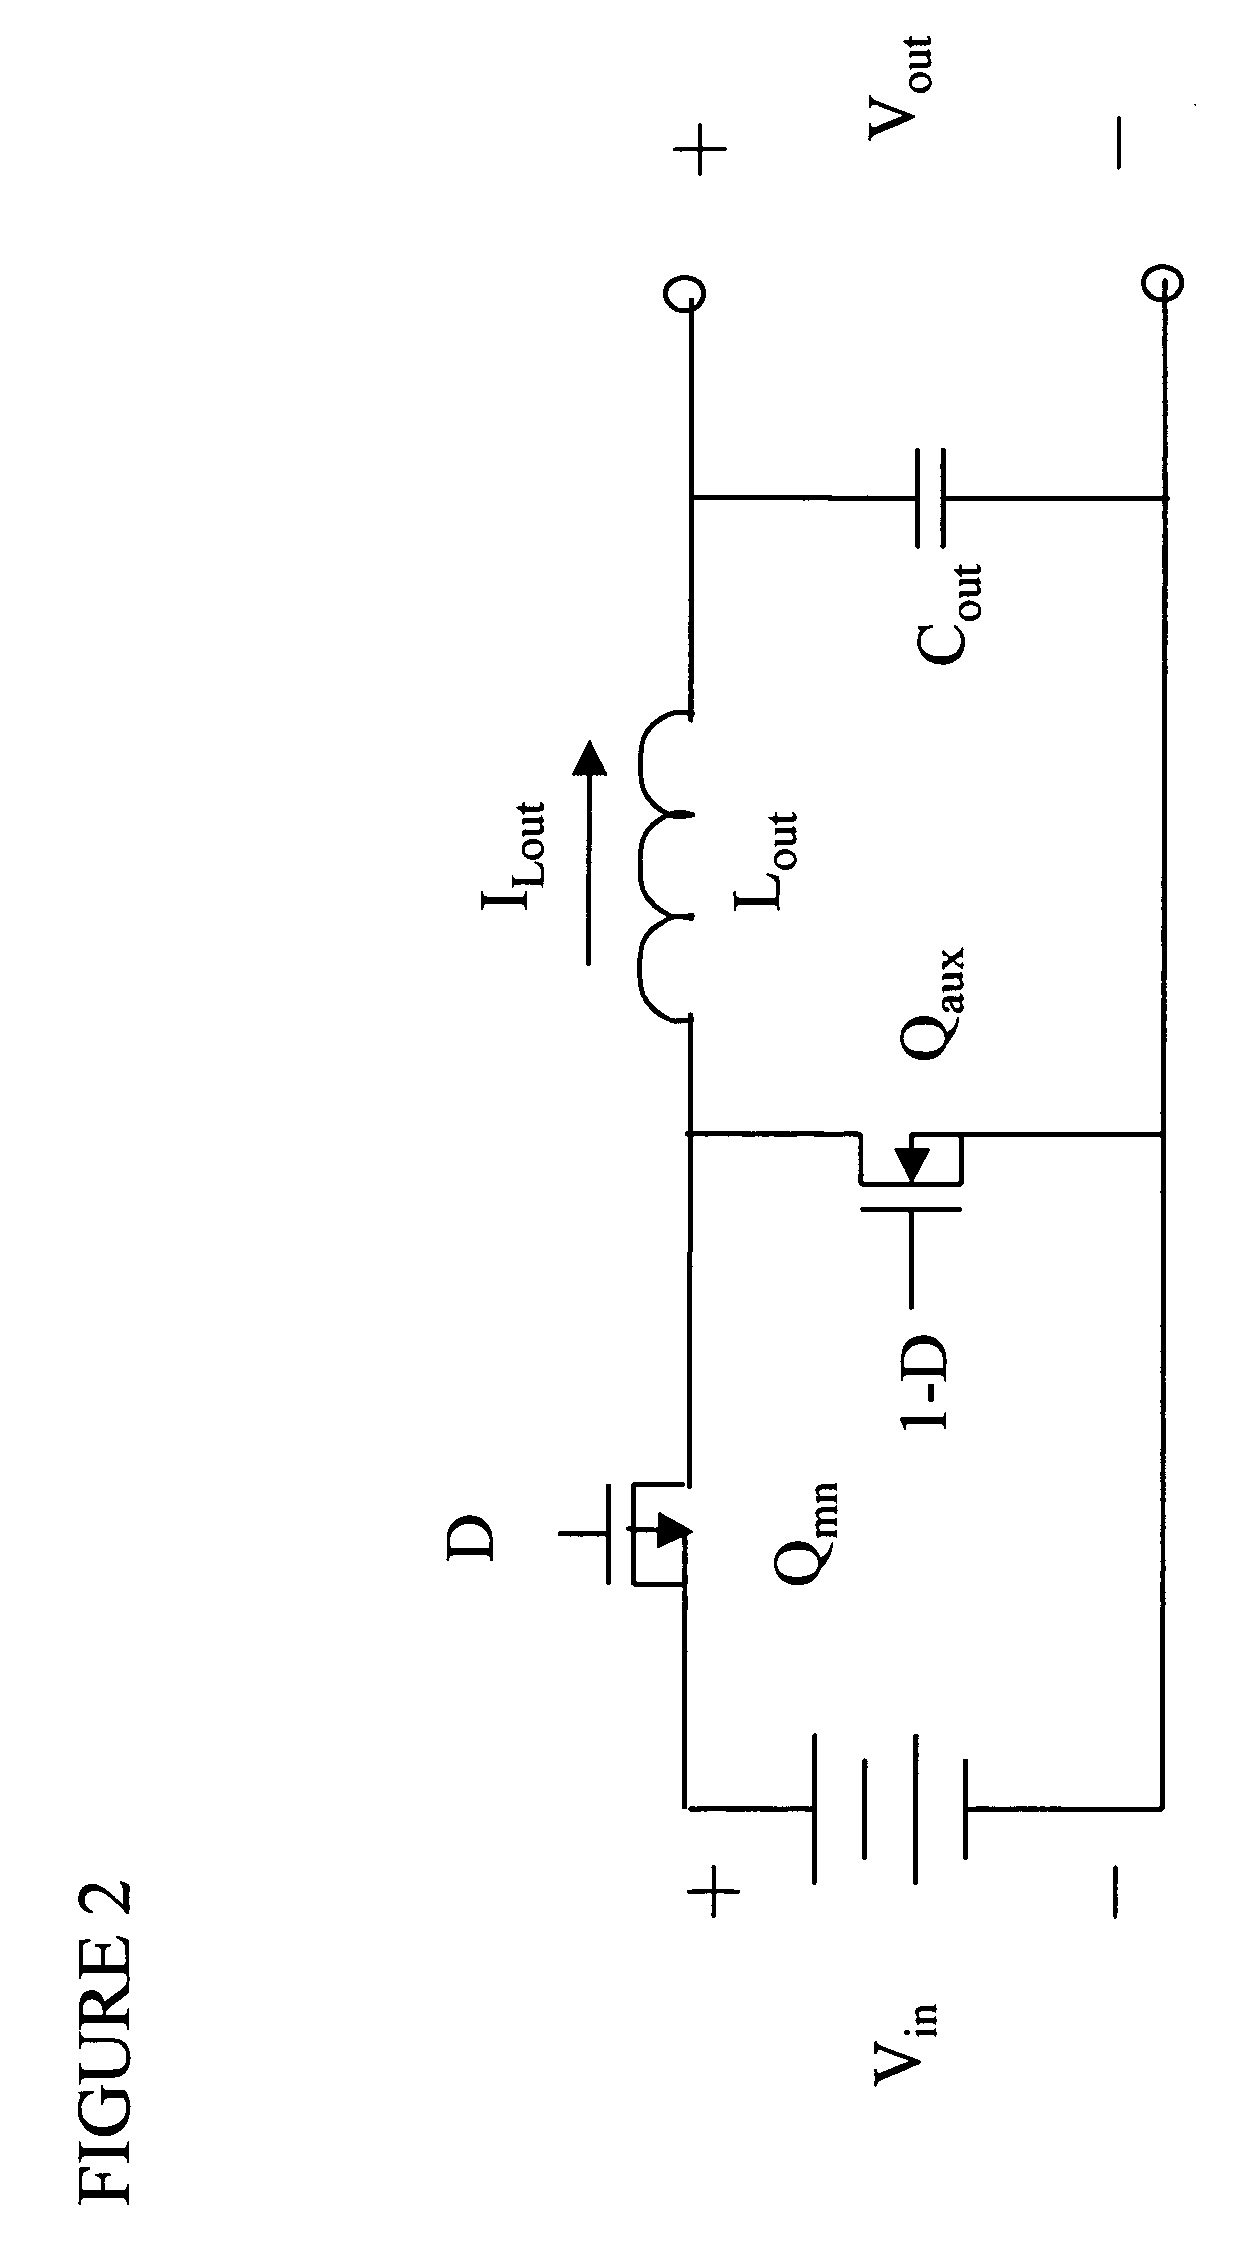 Driver for a power converter and a method of driving a switch thereof